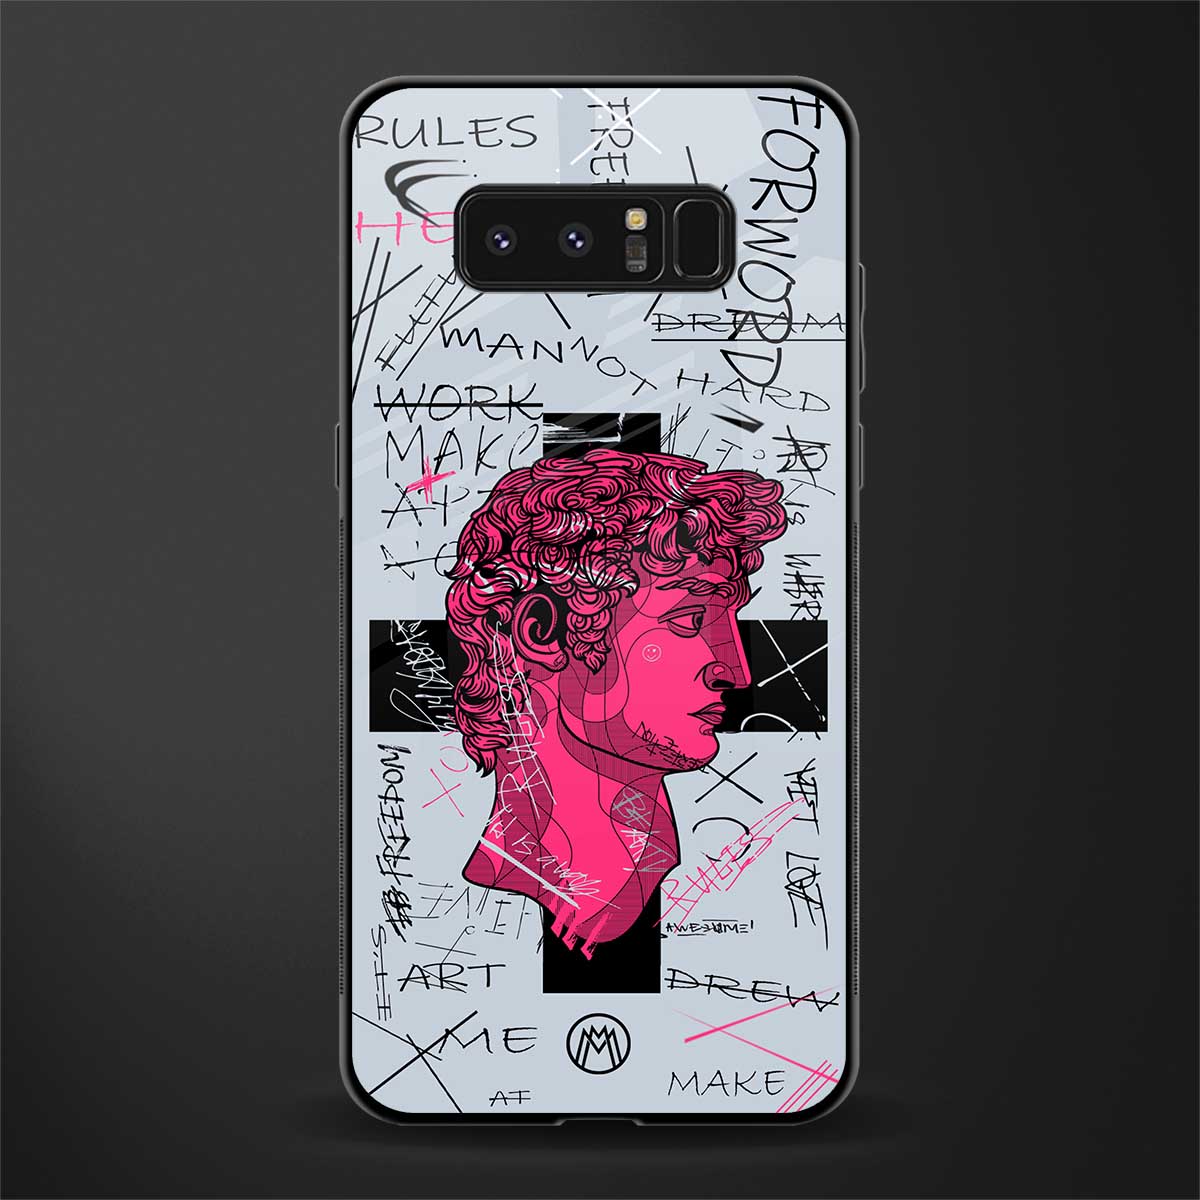 lost in reality david glass case for samsung galaxy note 8 image